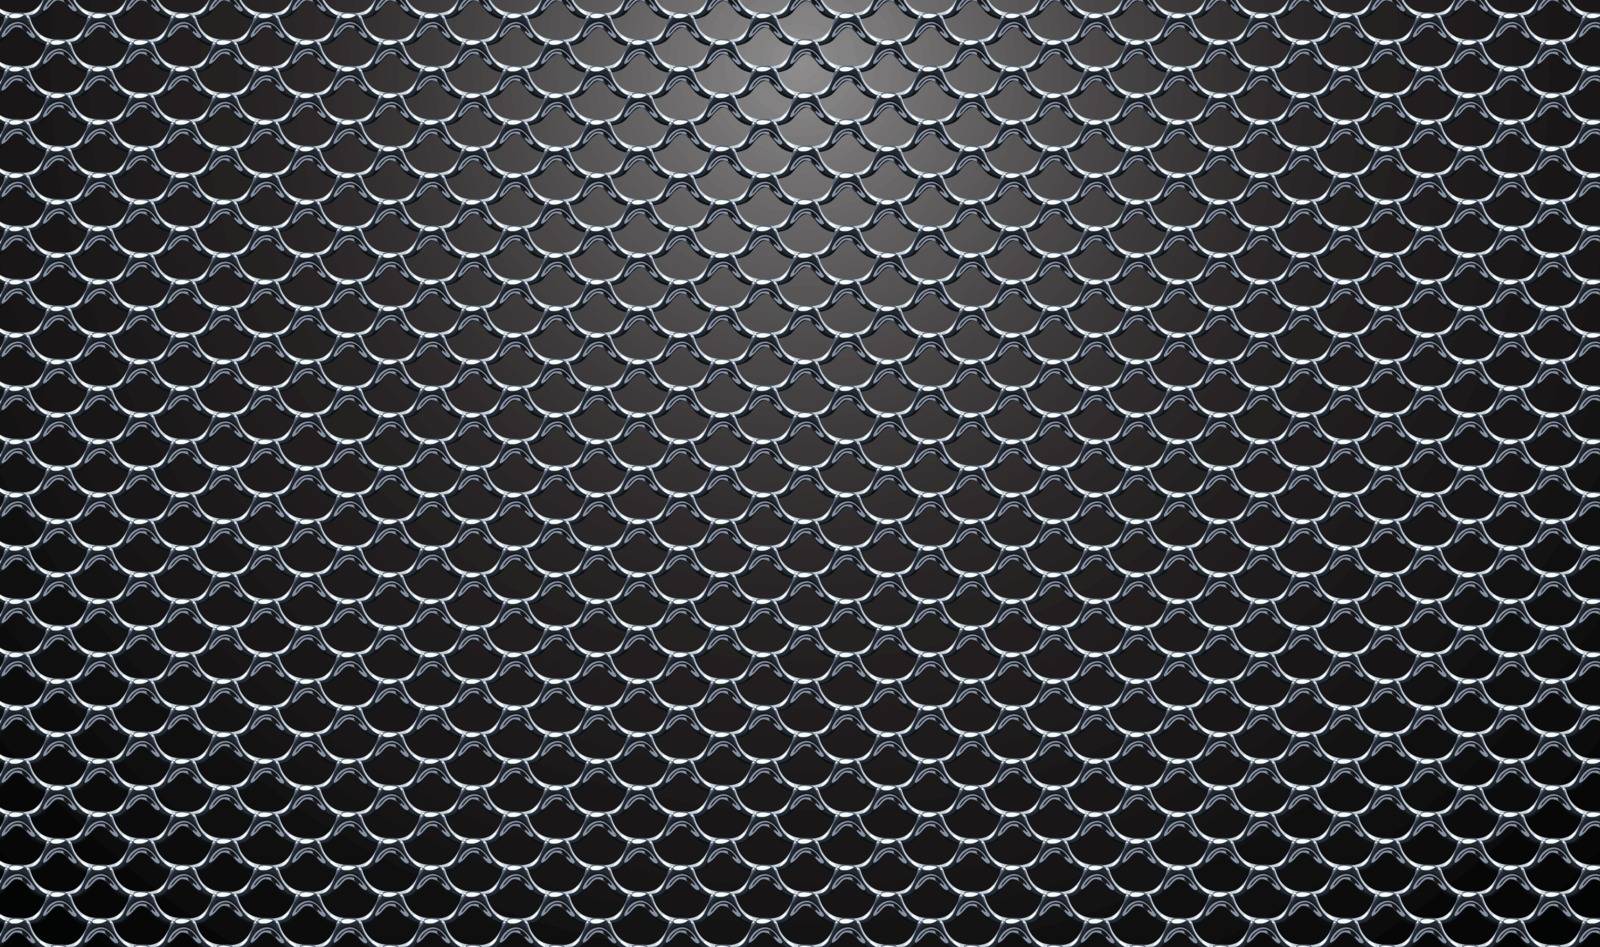 Steel mesh vector background by ayax